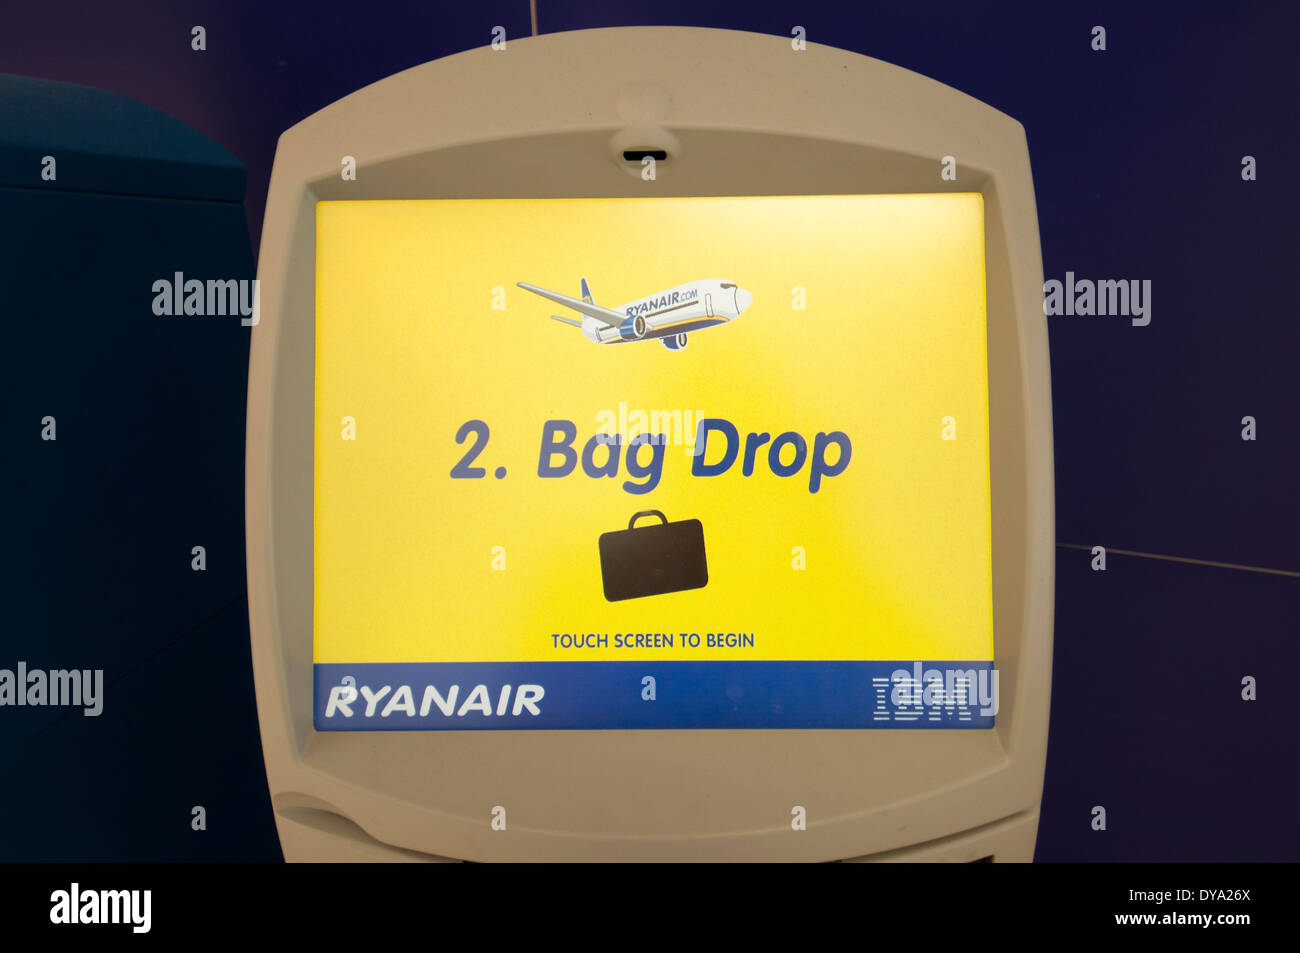 Bag Ryanair High Resolution Stock Photography and Images - Alamy